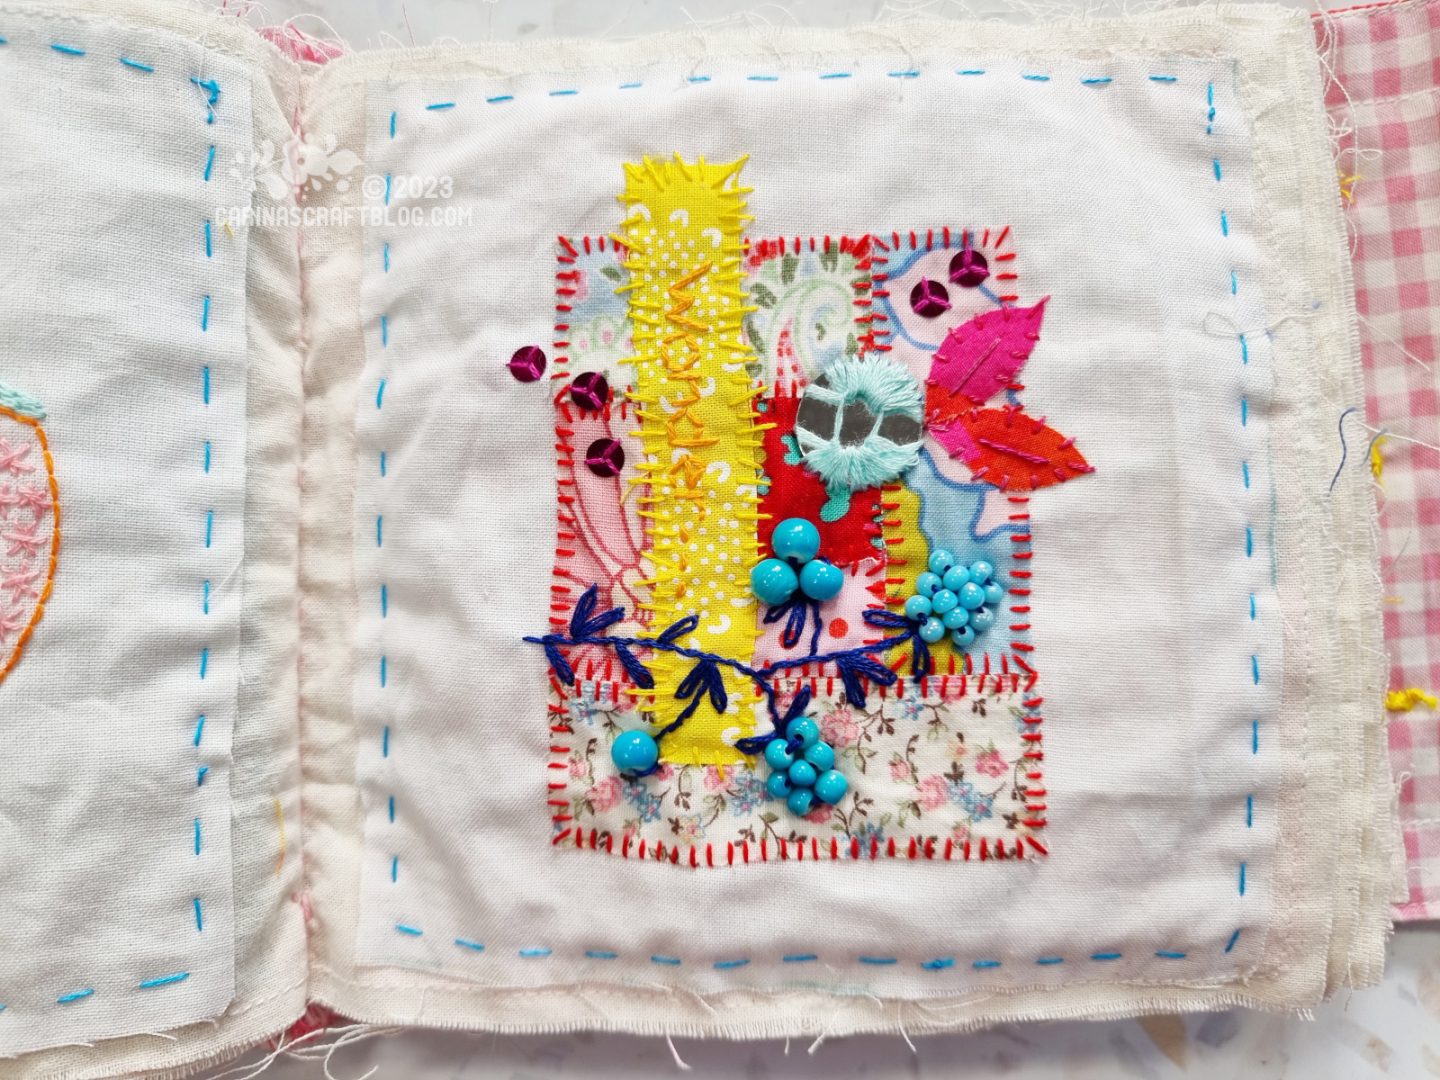 A page in a textile book. The background is unbleached cotton. On the fabric is appliqued a small patchwork with various stitches and beads and sequin embellishments. The main colours are pink, blues and yellow.